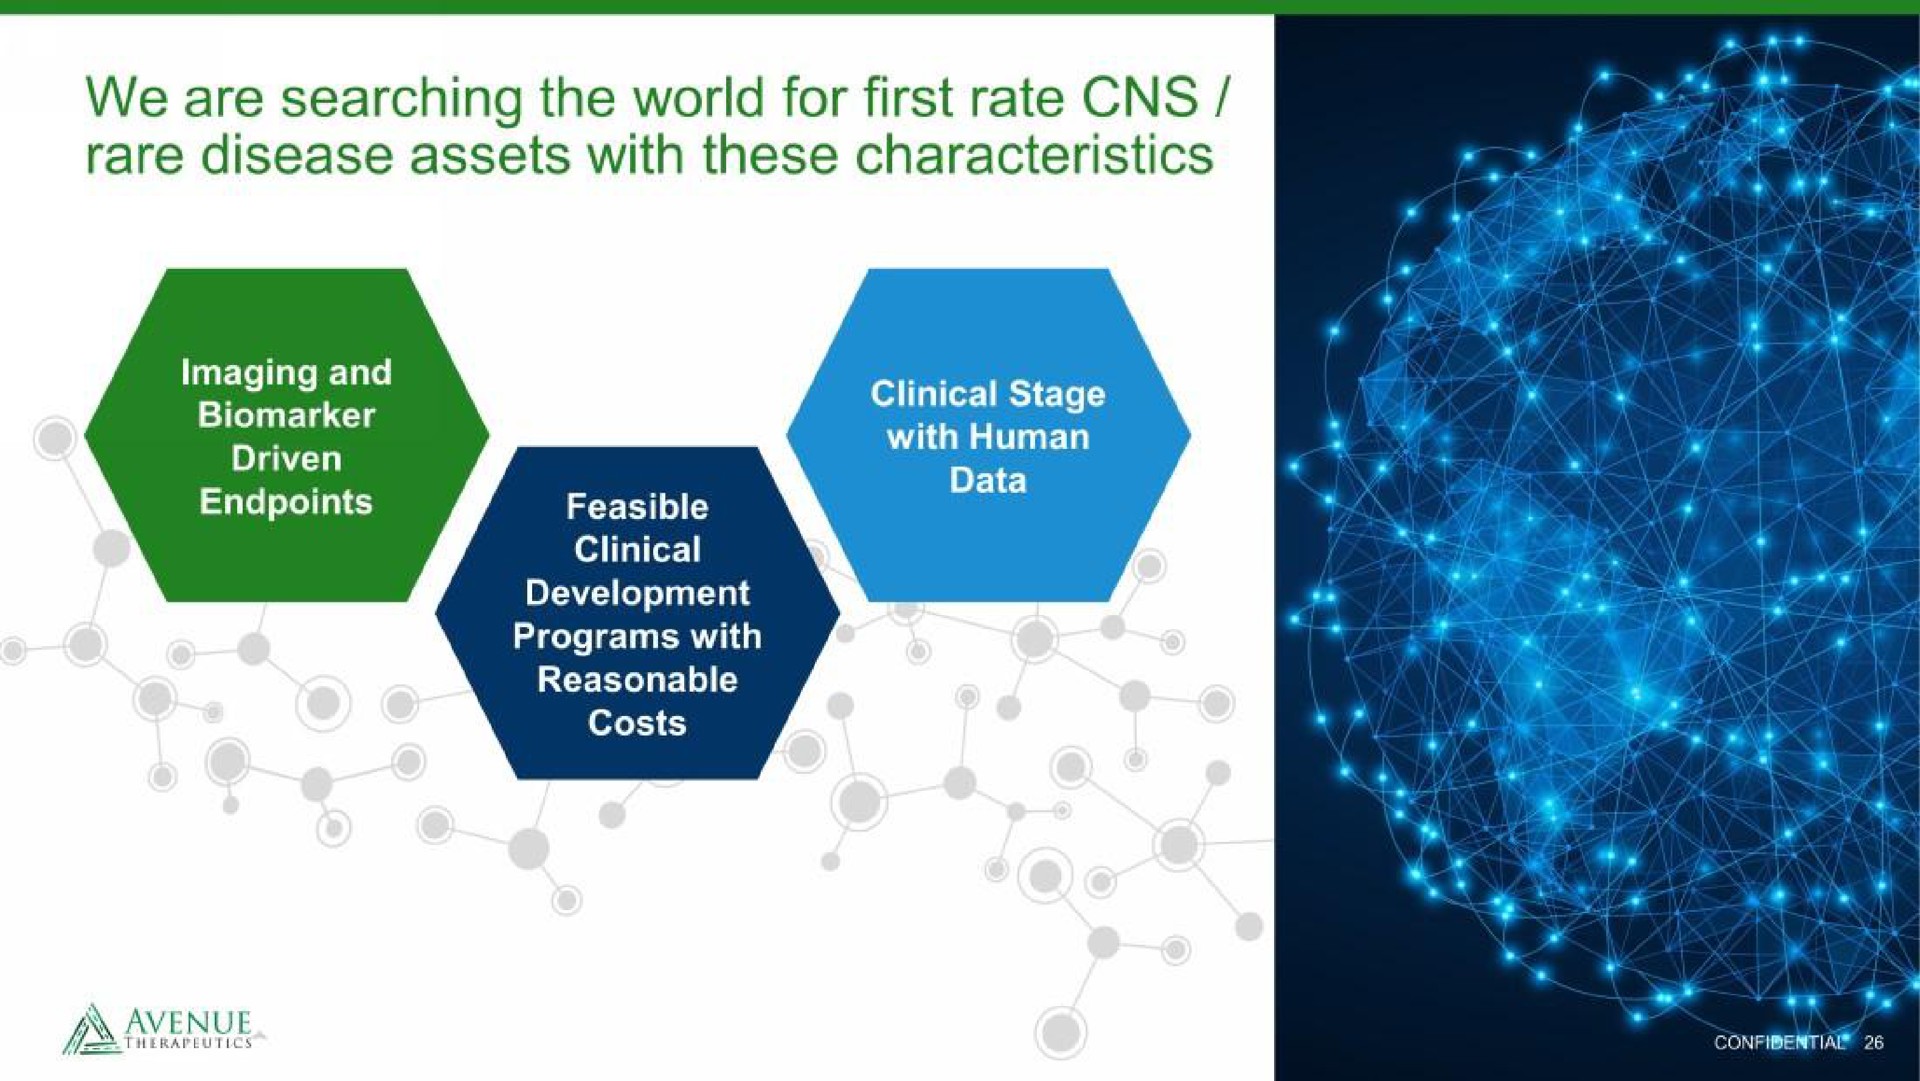 we are searching the world for first rate rare disease assets with these characteristics | Avenue Therapeutics